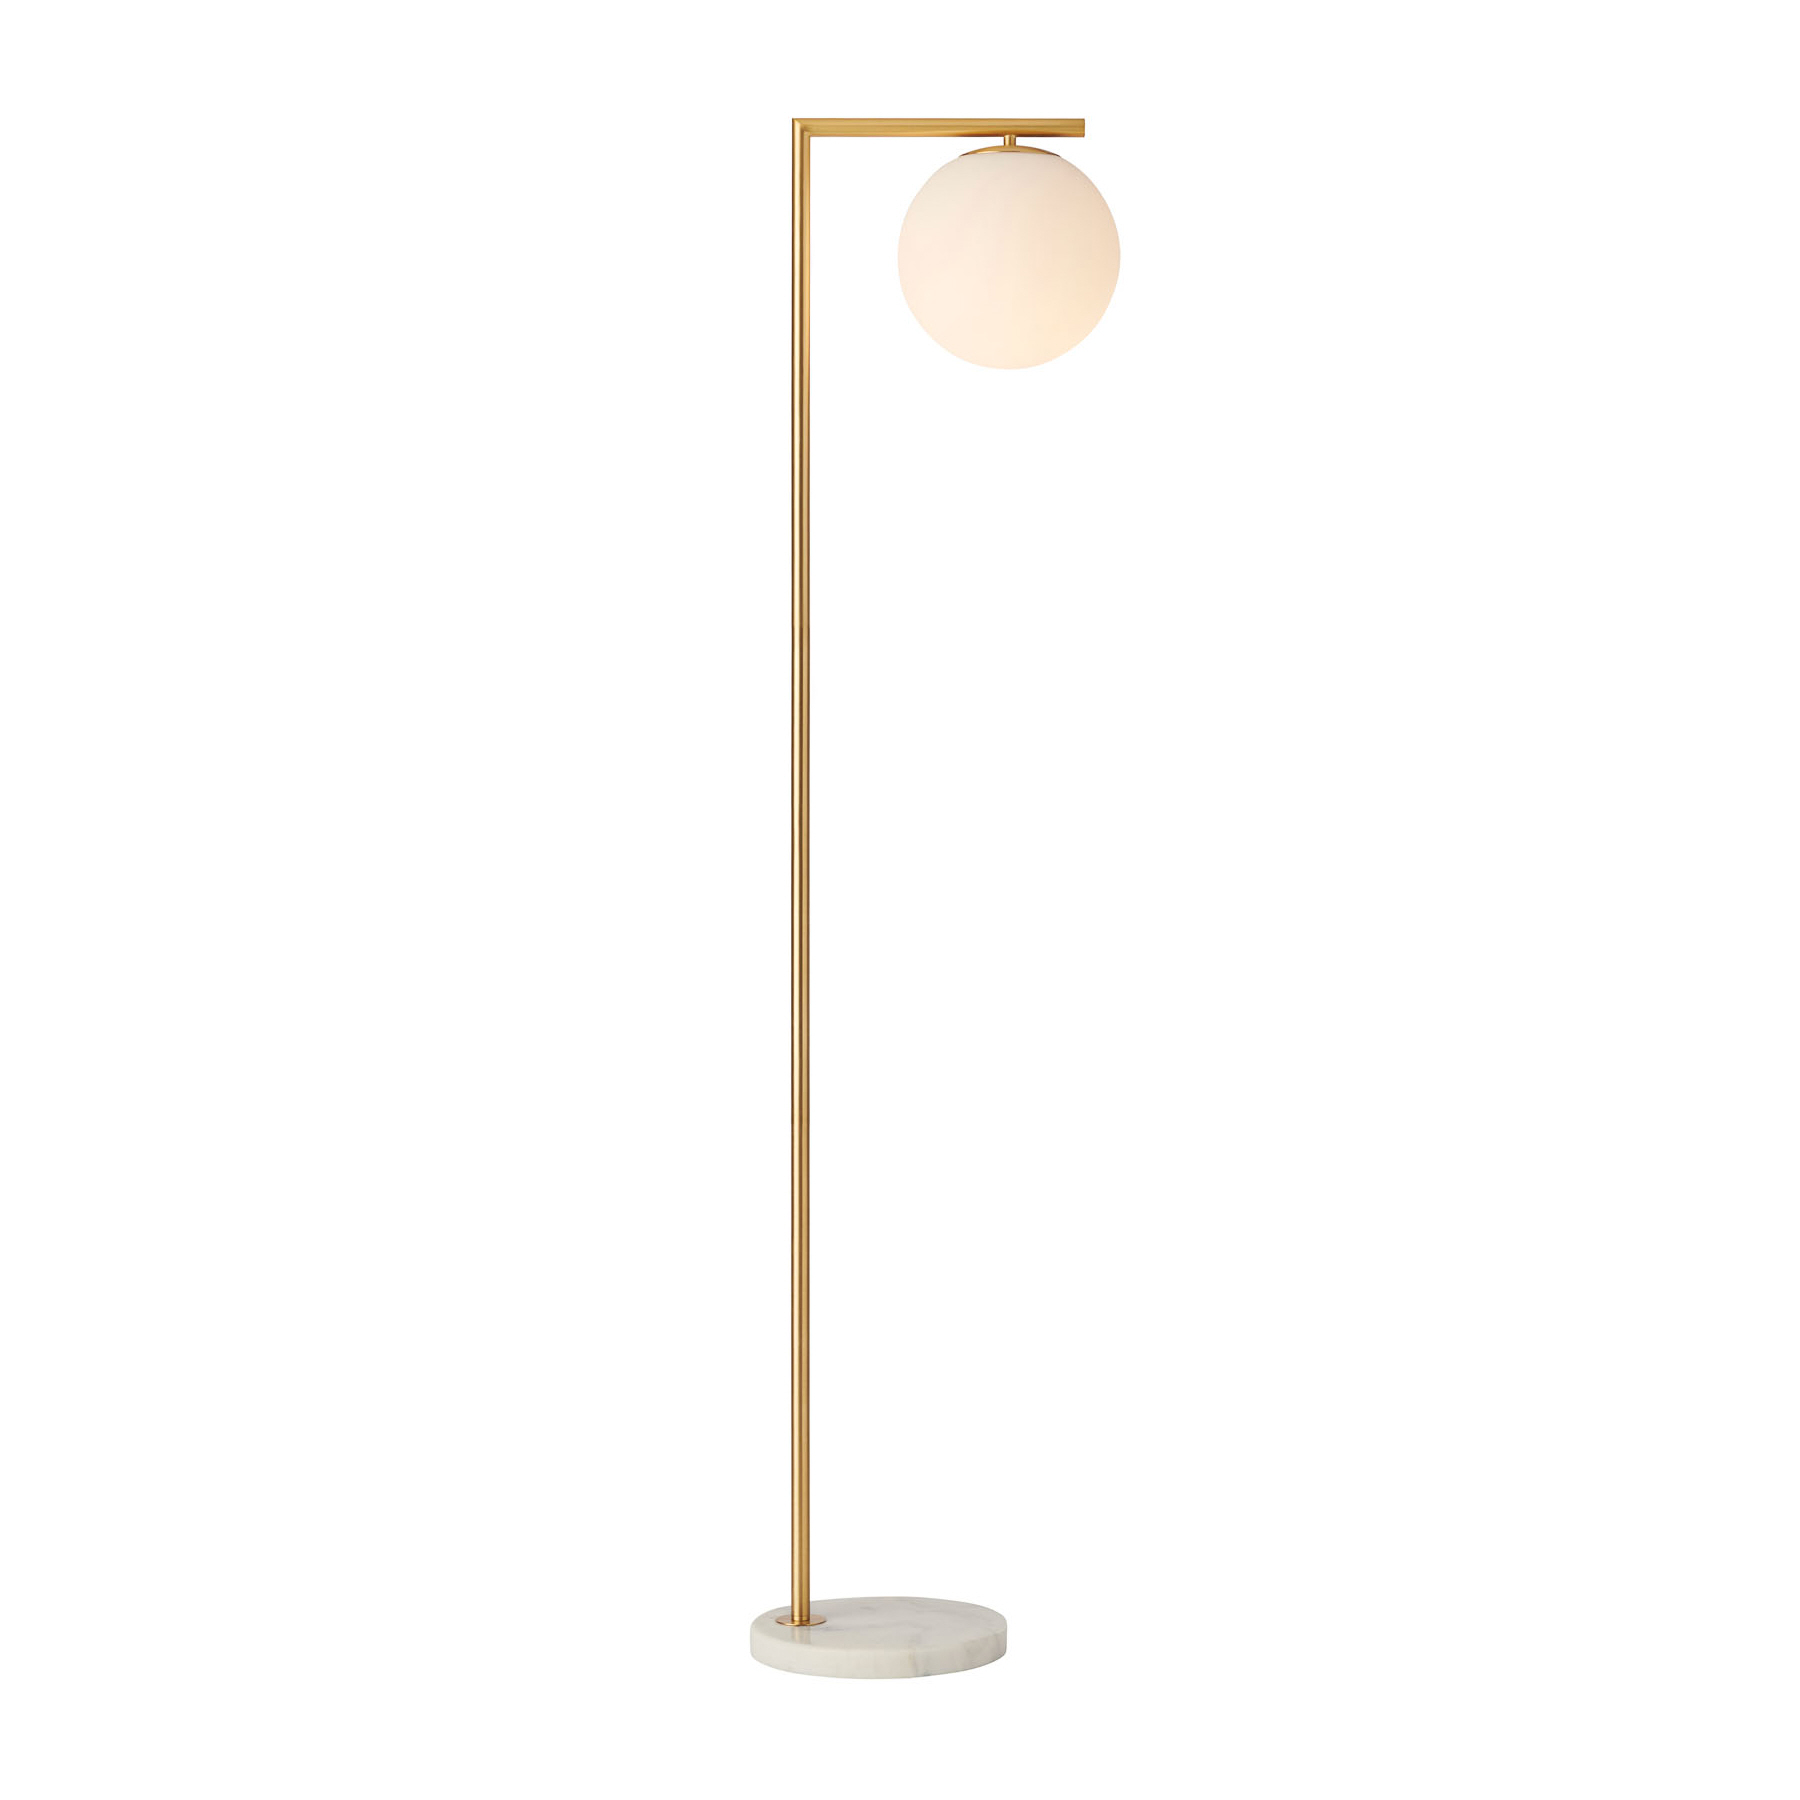 Remi Brass Floor Lamp with White Ball Shade